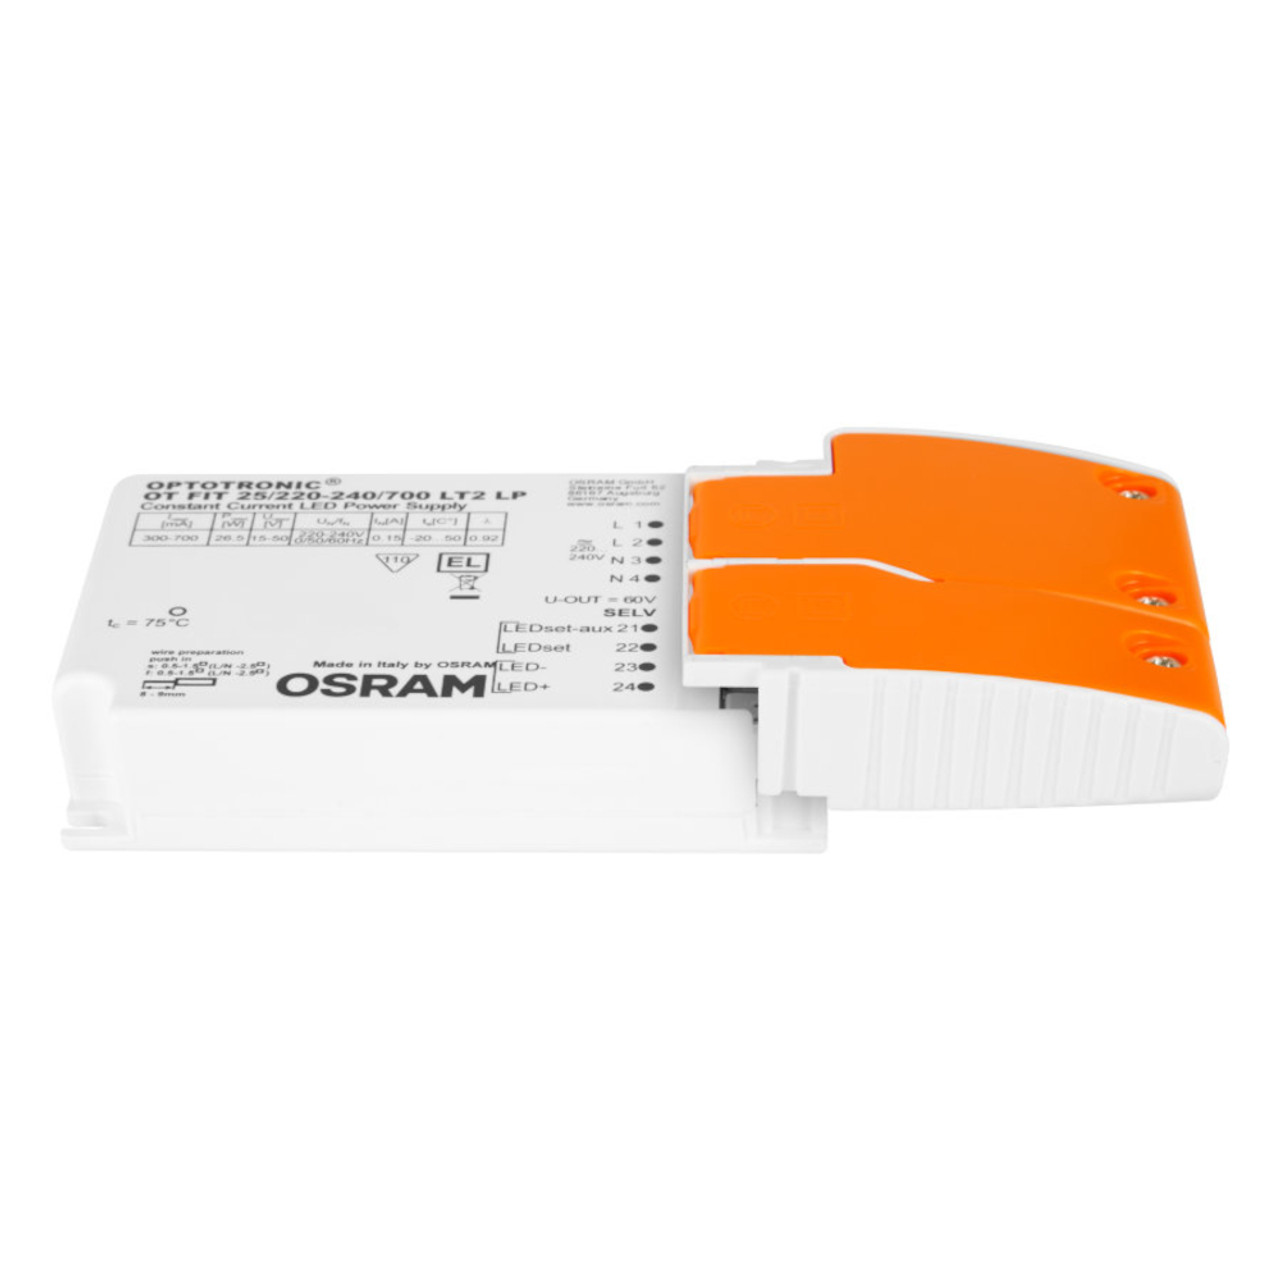 Osram Optotronic Fit 40W 500-1050mA Constant Current LEDset Driver